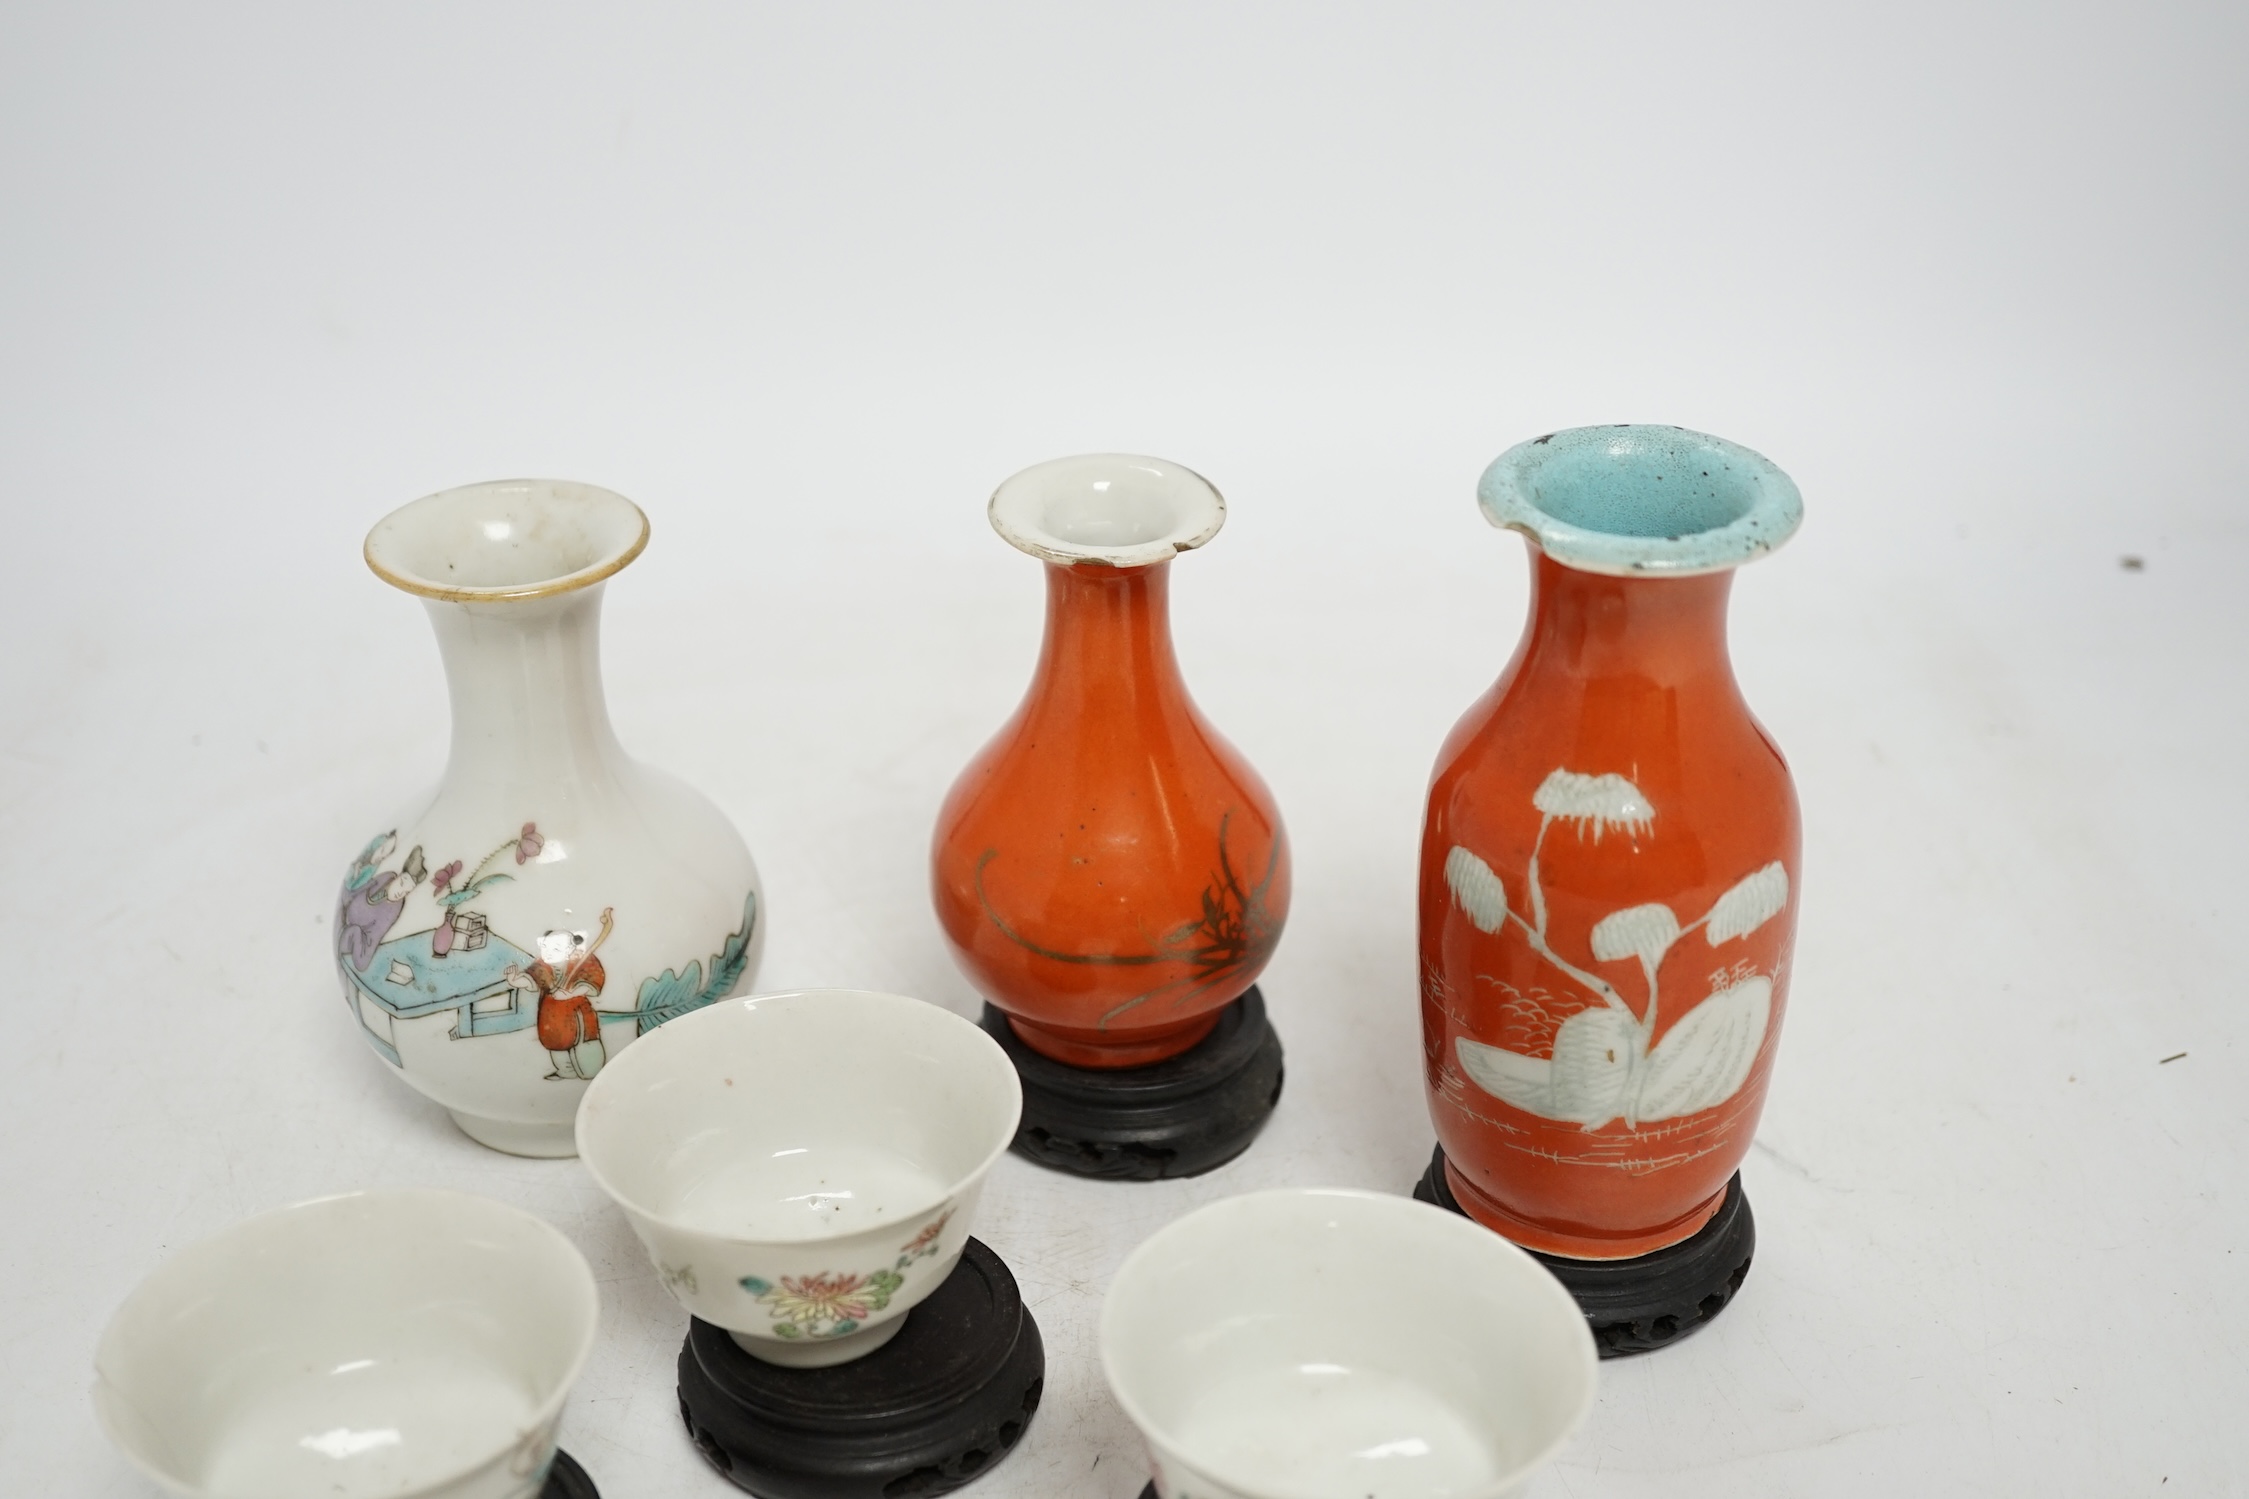 Six Chinese miniature porcelain vases and tea bowls, with wood stands, largest overall 15cm high. Condition - poor to fair